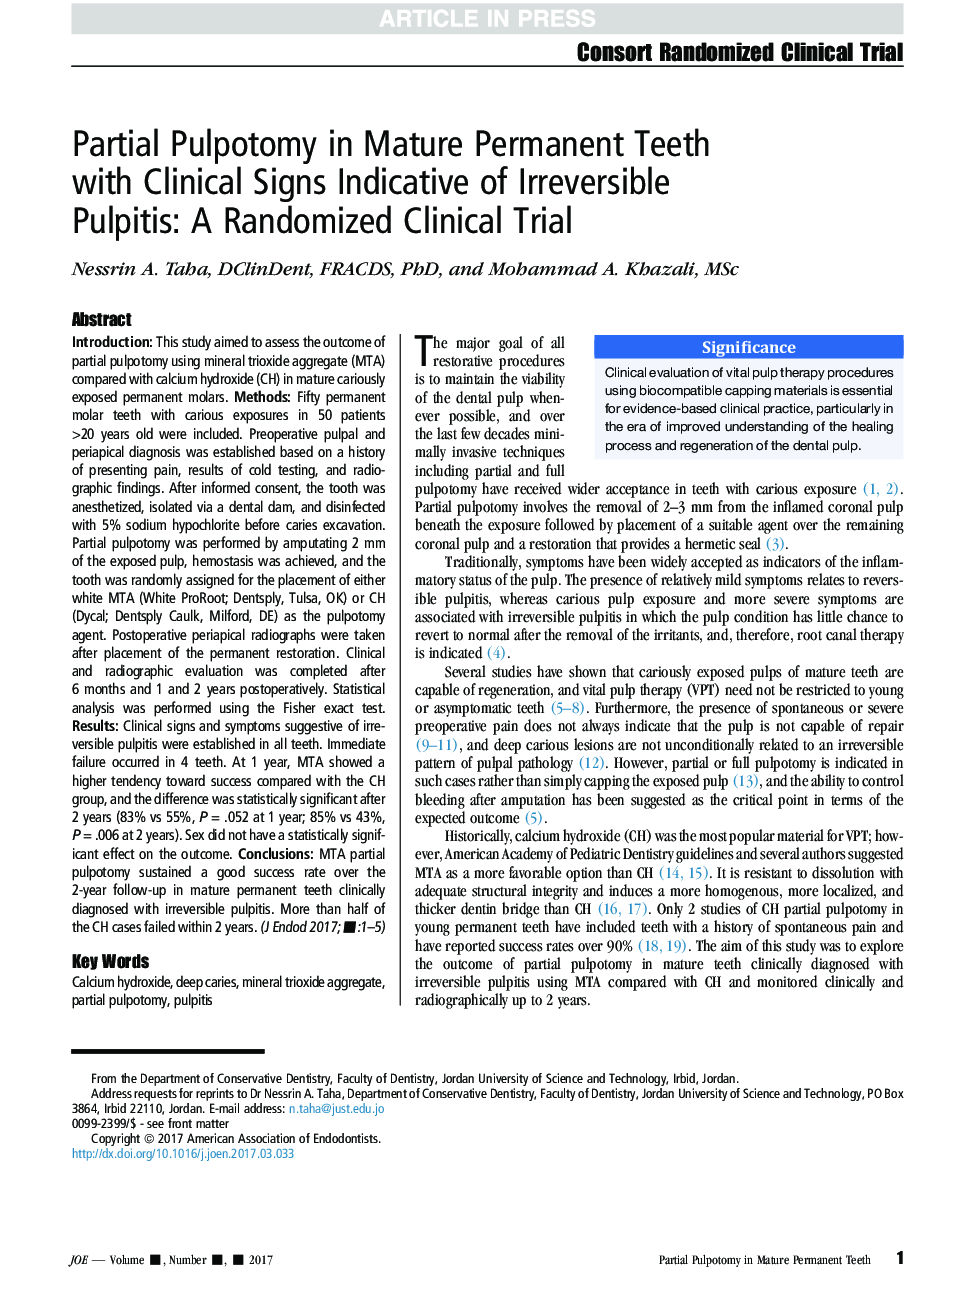 Partial Pulpotomy in Mature Permanent Teeth with Clinical Signs Indicative of Irreversible Pulpitis: A Randomized Clinical Trial